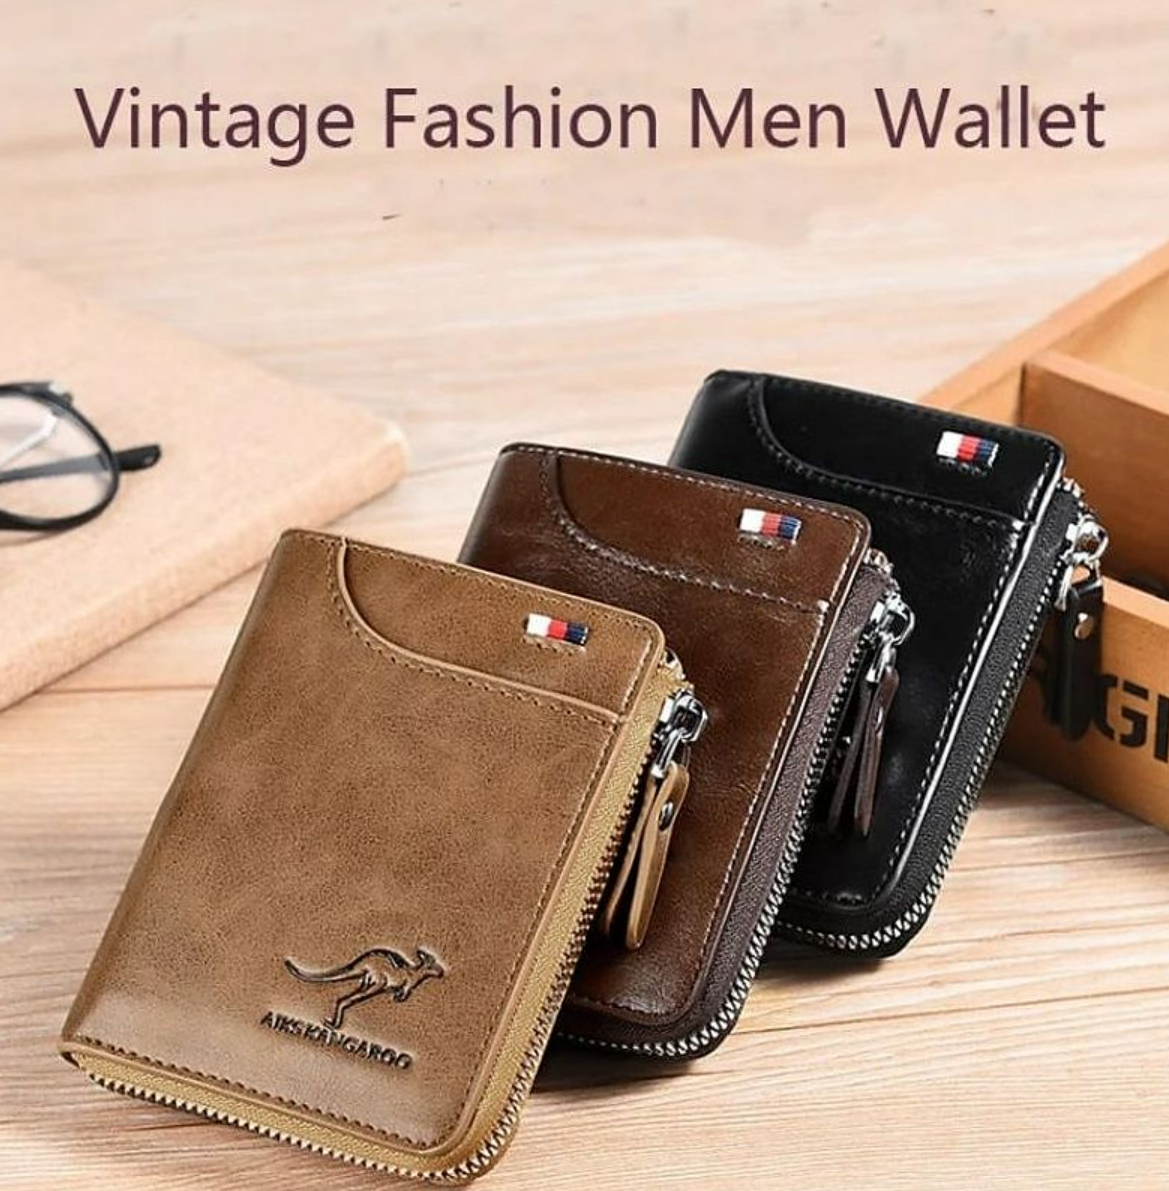 Kangaroo Wallet Men's RFID Blocking PU Leather Wallet with Zipper Multi Business Credit Card Holder Purse High Quality